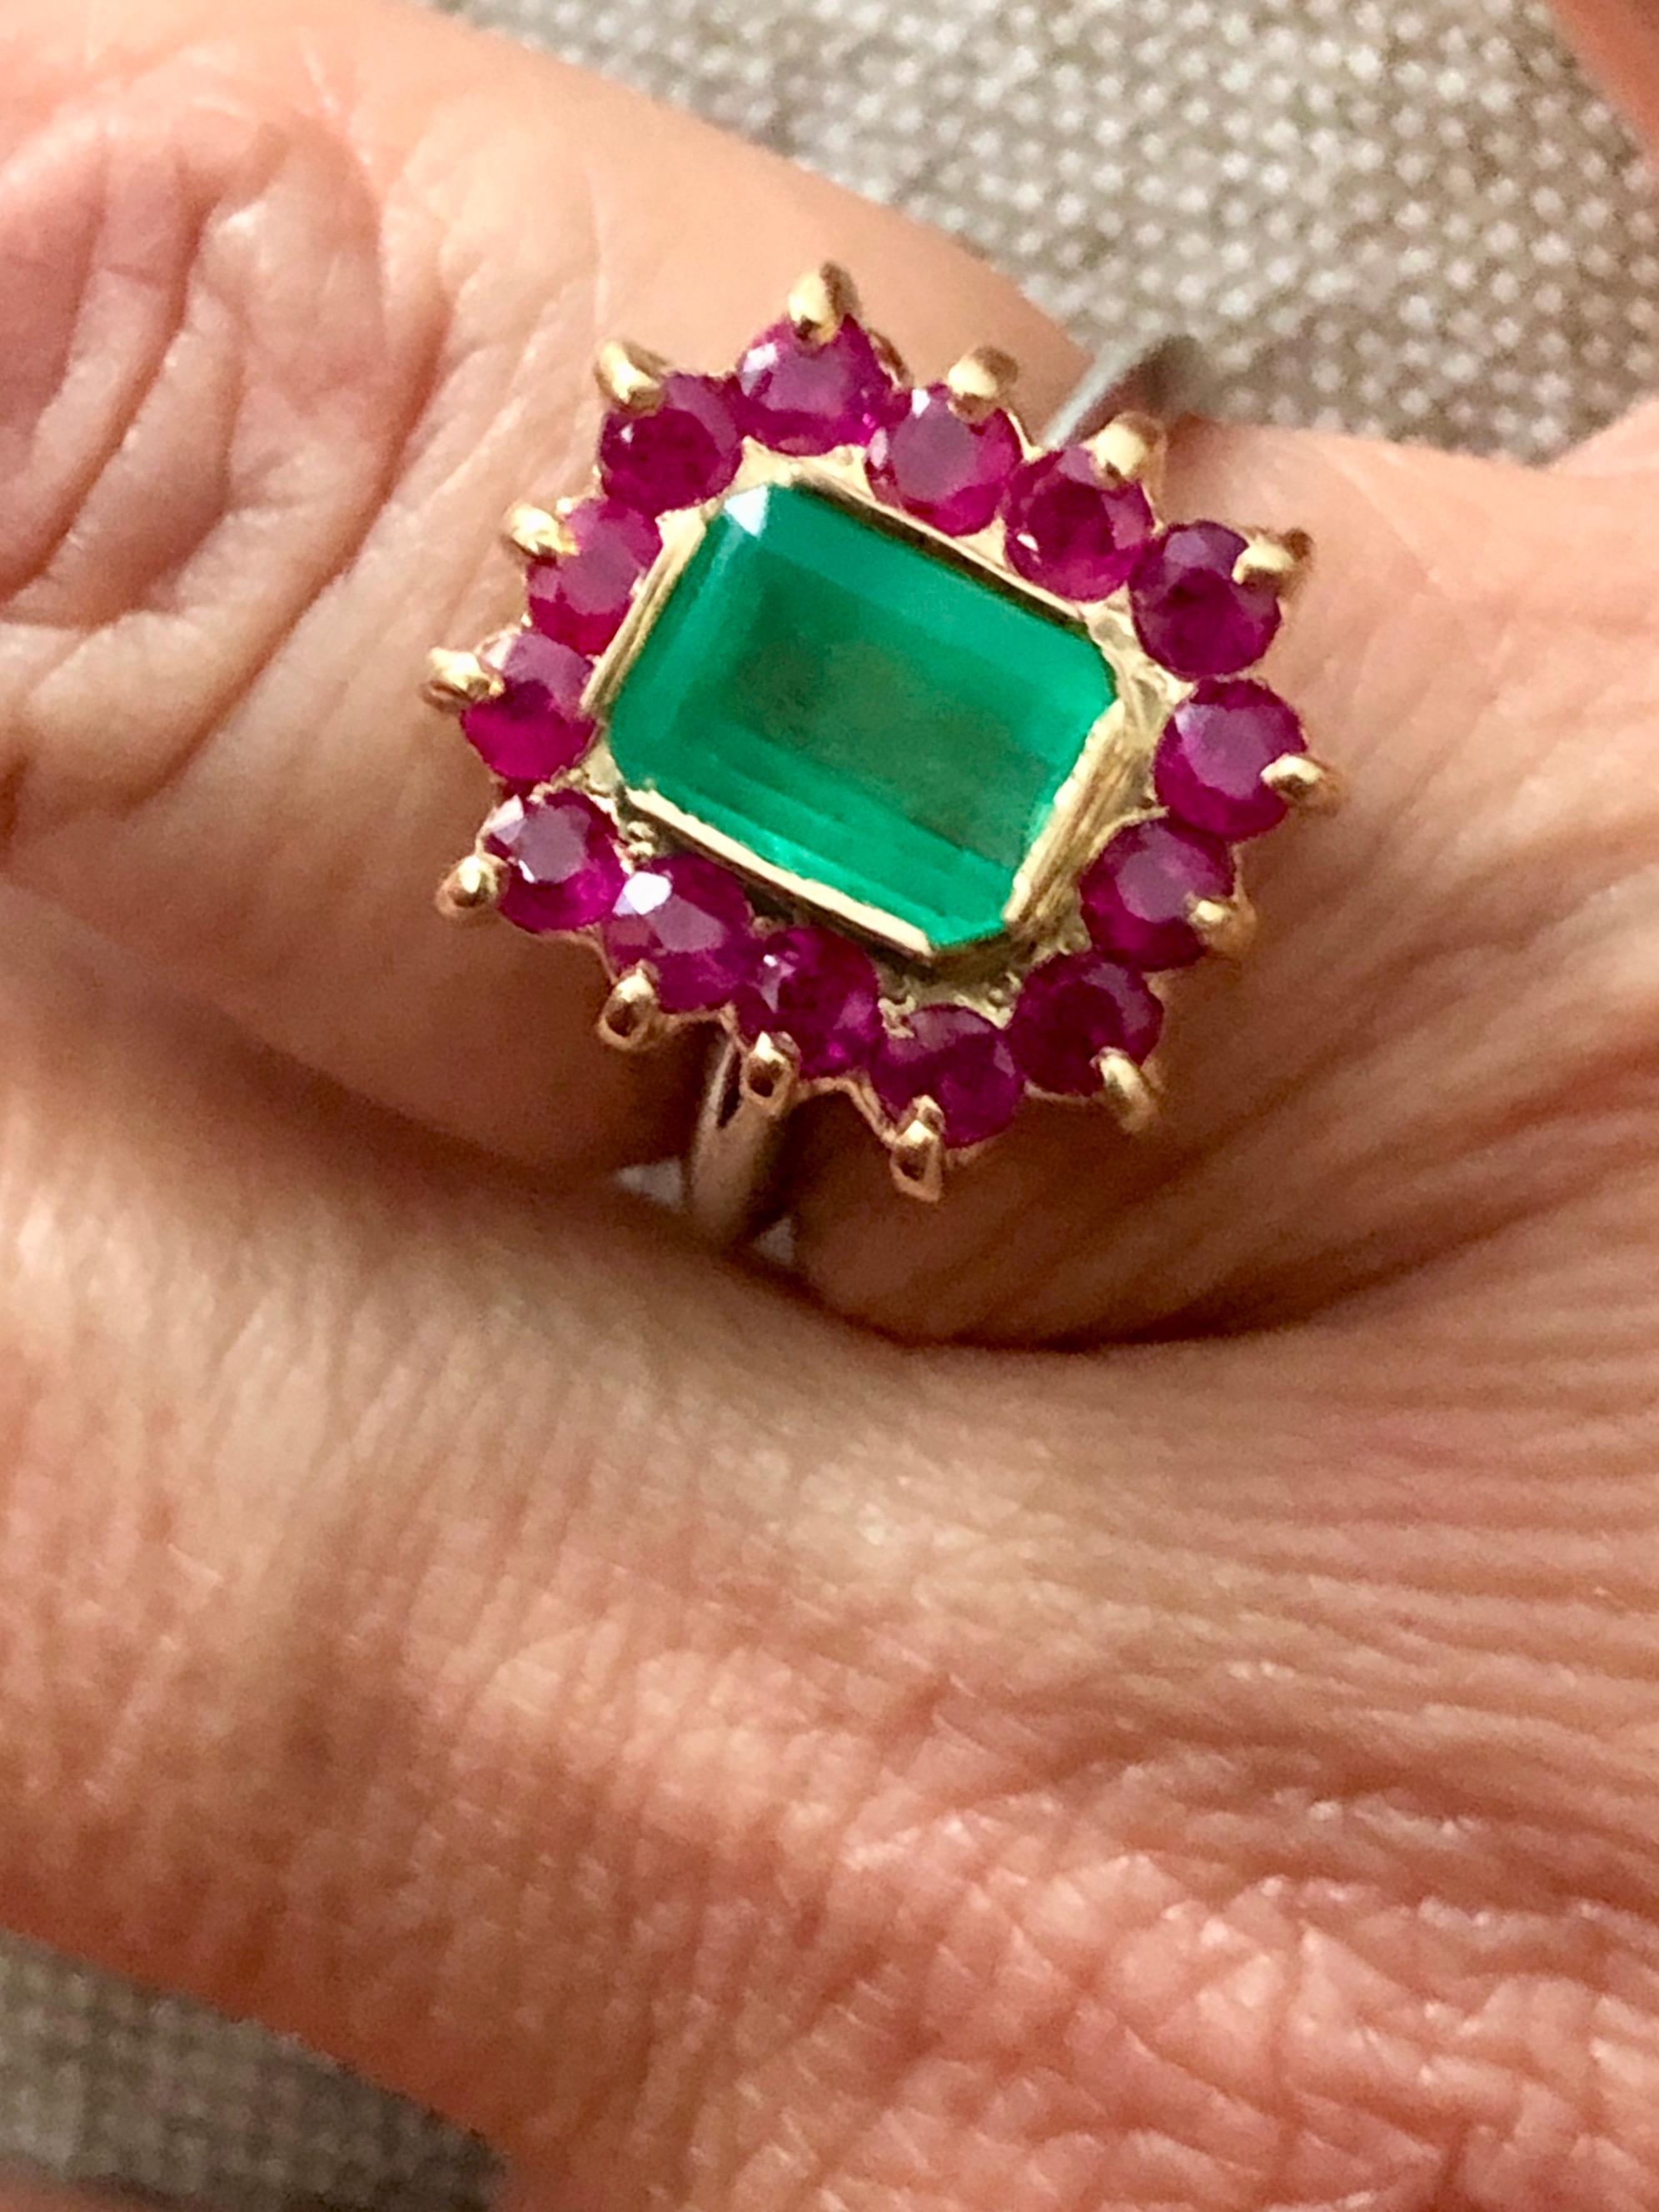 3.50 carat Vintage emerald, ruby ring, set in the center with a natural Colombian emerald measuring approximately 7.7mmx5.8mm., weighing approximately 1.40 carats, framed by 15 round rubies weighing approximately 2.10 carats. 
The 18K yellow gold